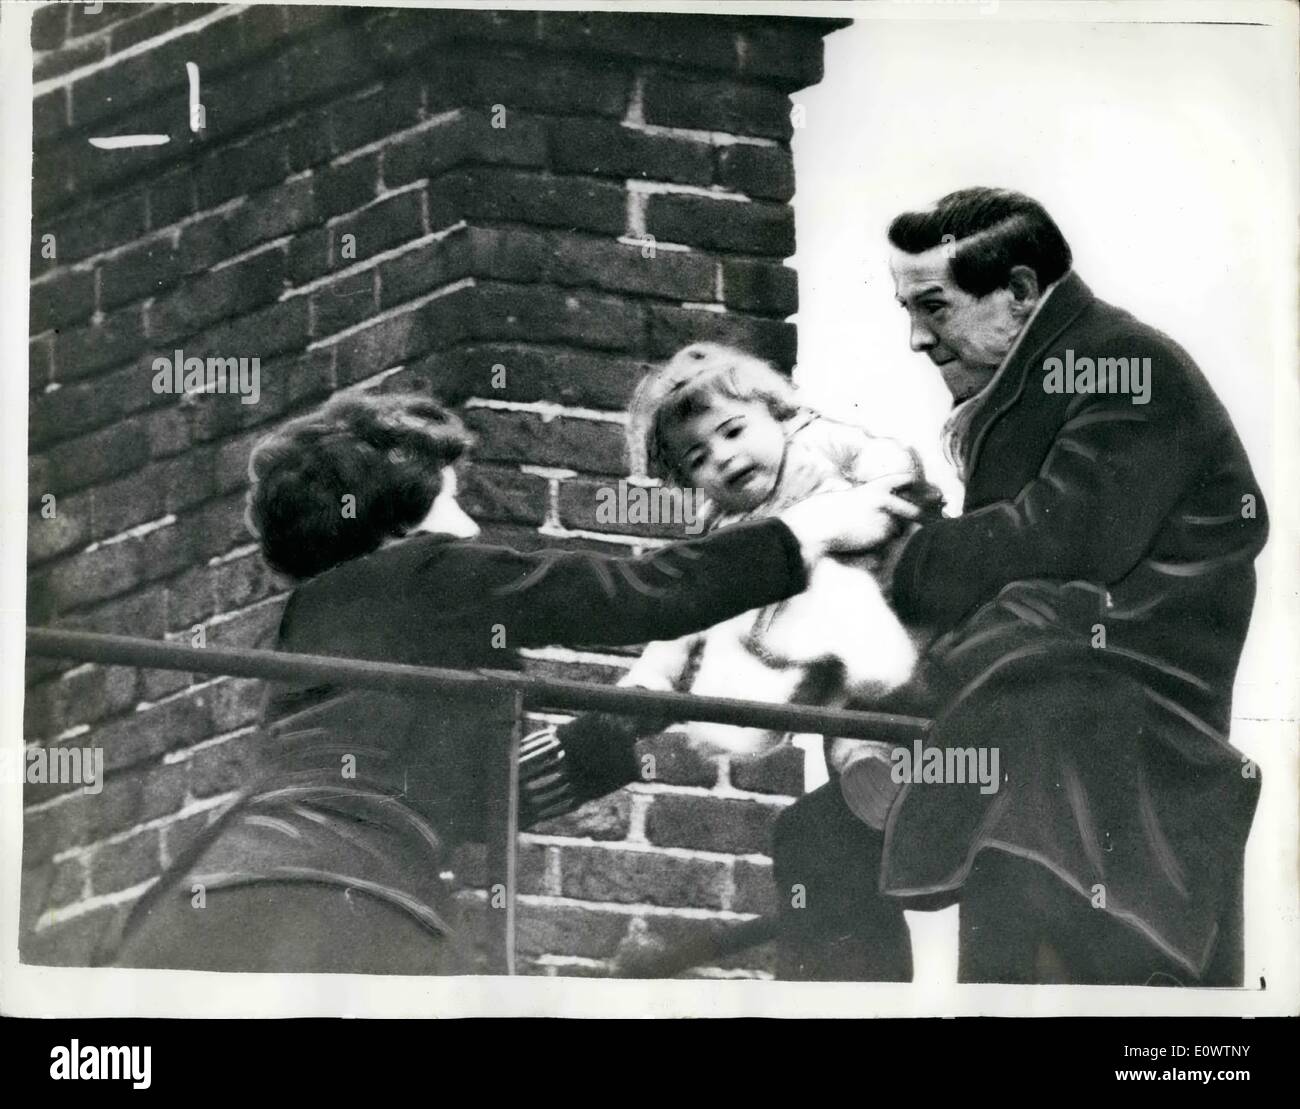 Mar. 03, 1964 - Rooftop Drama in Bloomsbury: for 85 minutes yesterday, as hundreds of people watched from below, 30-year-old Thomas French stood precariously balanced at the top of a four story building 60 feet above the street in Bloomsbury London, holding his 18-month-old son Stewart in his arms, threatening to jump off. French said that he had been evicted from his home, and that his wife had left him. Fireman and helpers spread tarpaulins below, and three policemen and women police constable Margaret cleland, 23. gathered on the roof and tried to reason with the man Stock Photo